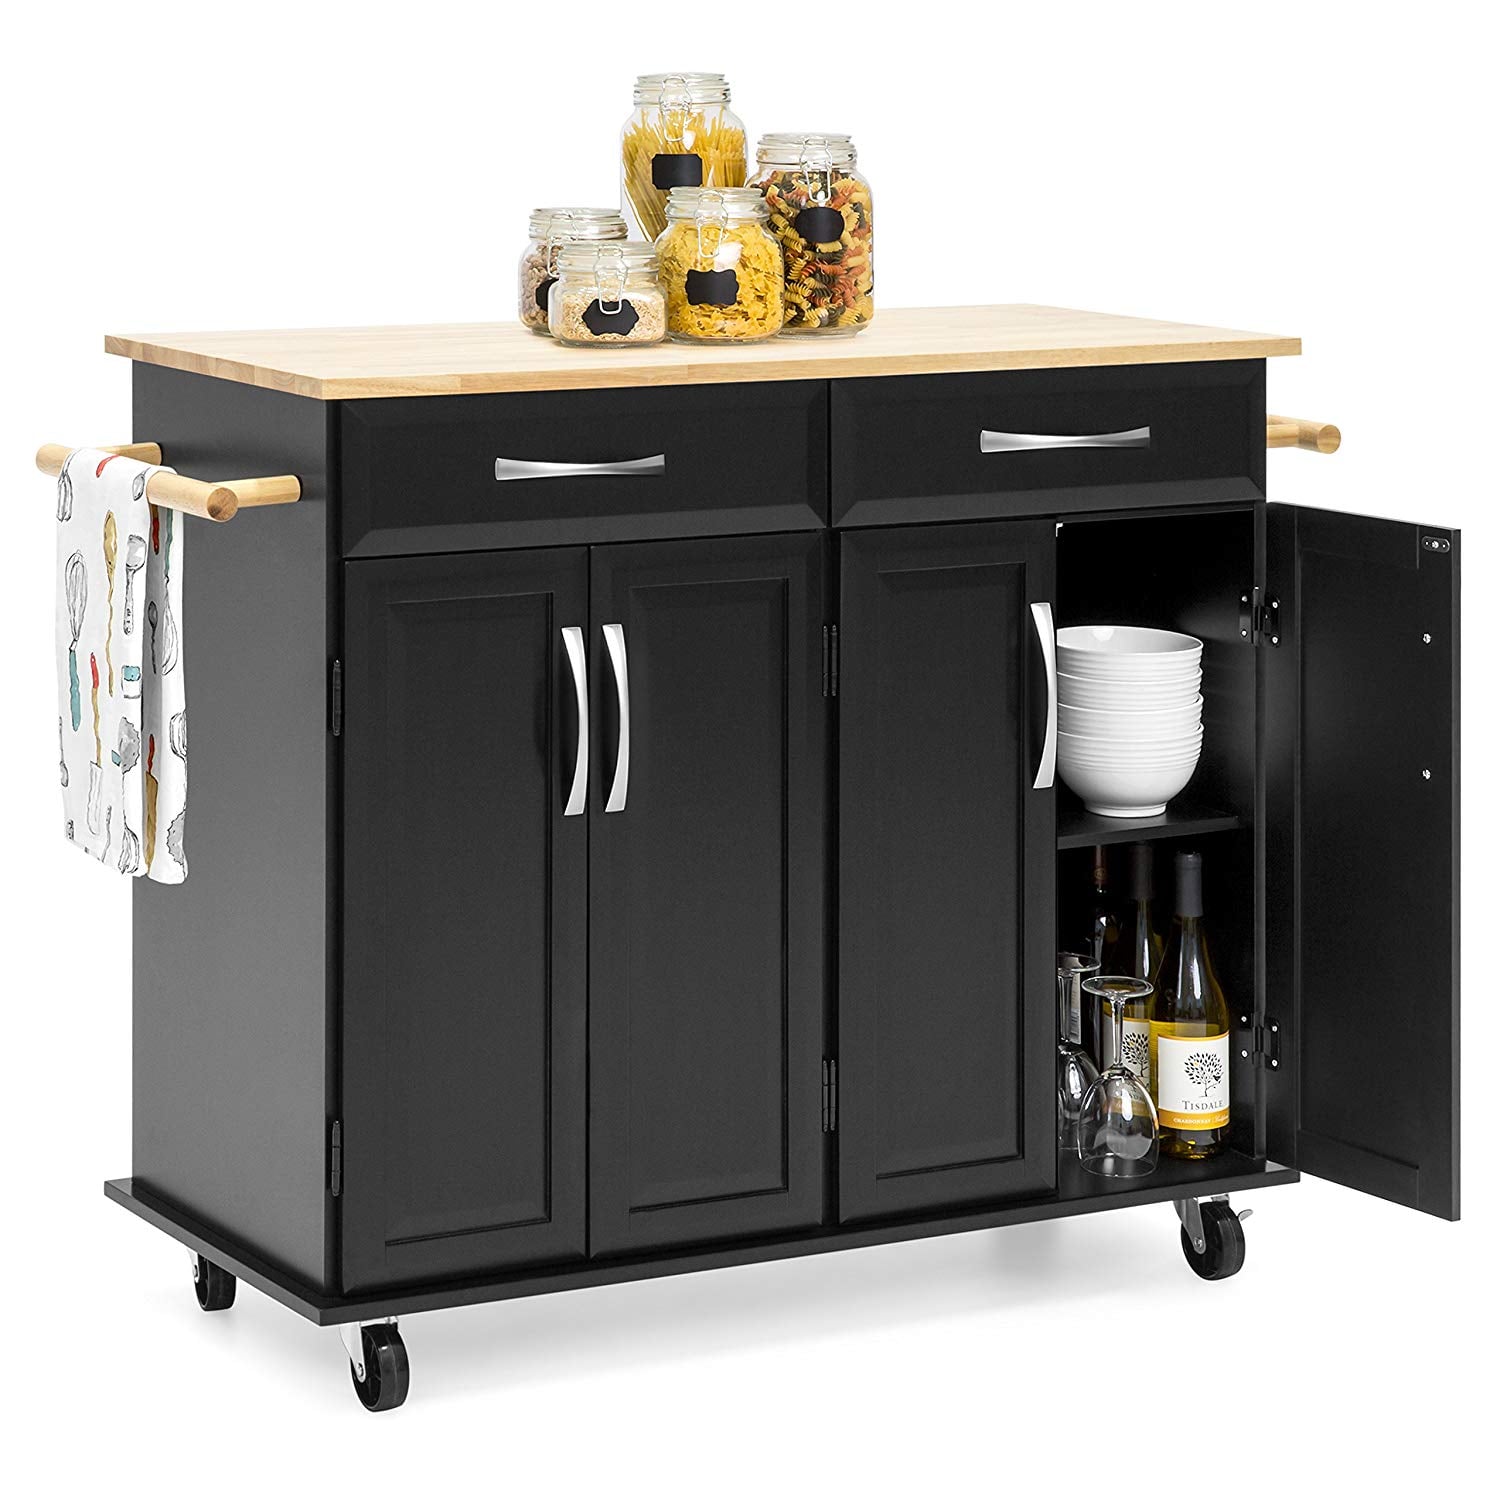 Best Choice Products Portable Kitchen Island Cart 25 Kitchen Islands You Need To See Right Now All On Amazon Popsugar Home Photo 15